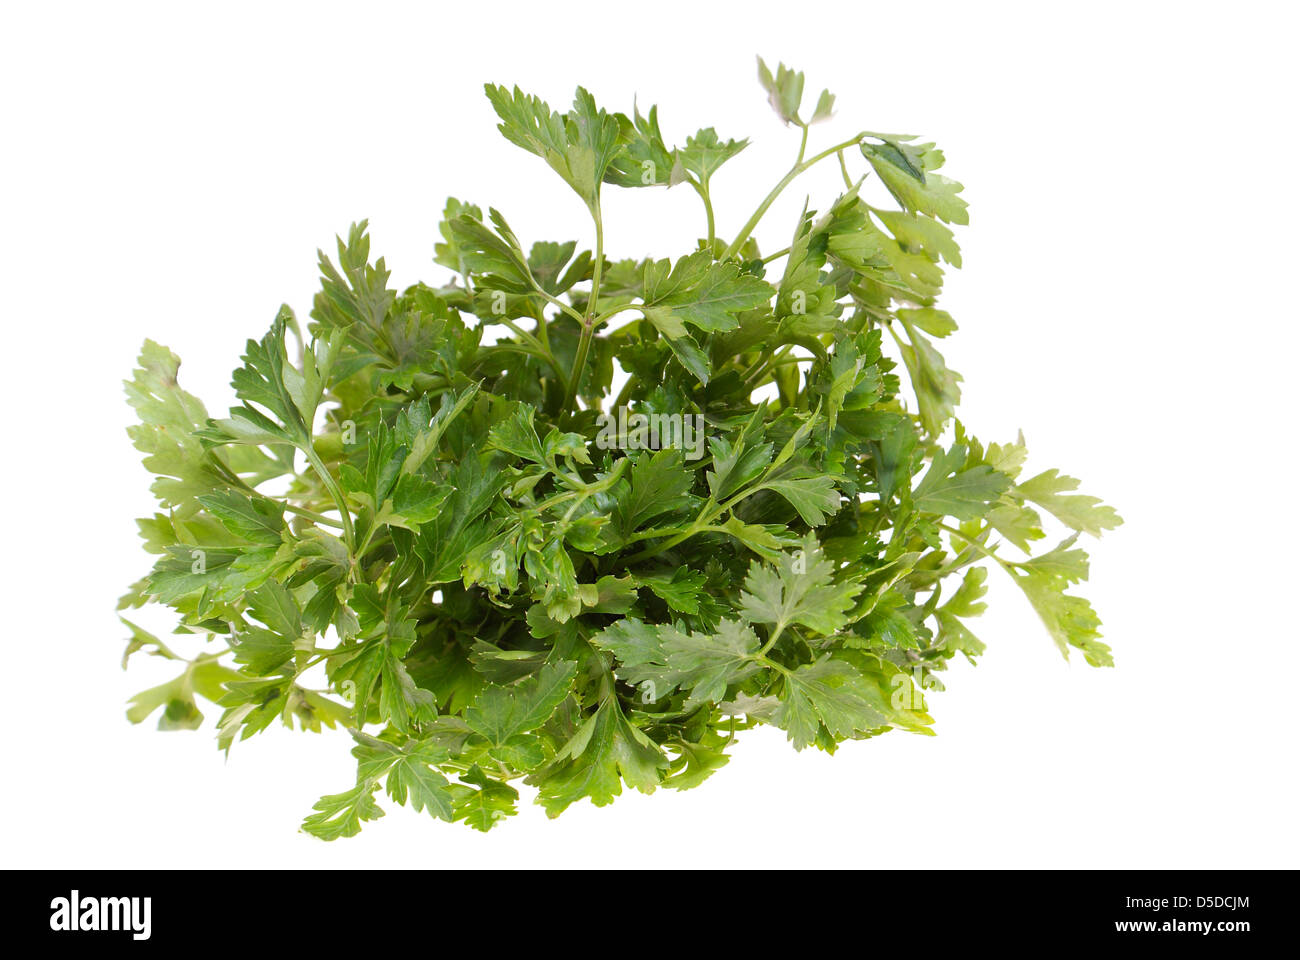 bunch green of parsley on white background Stock Photo